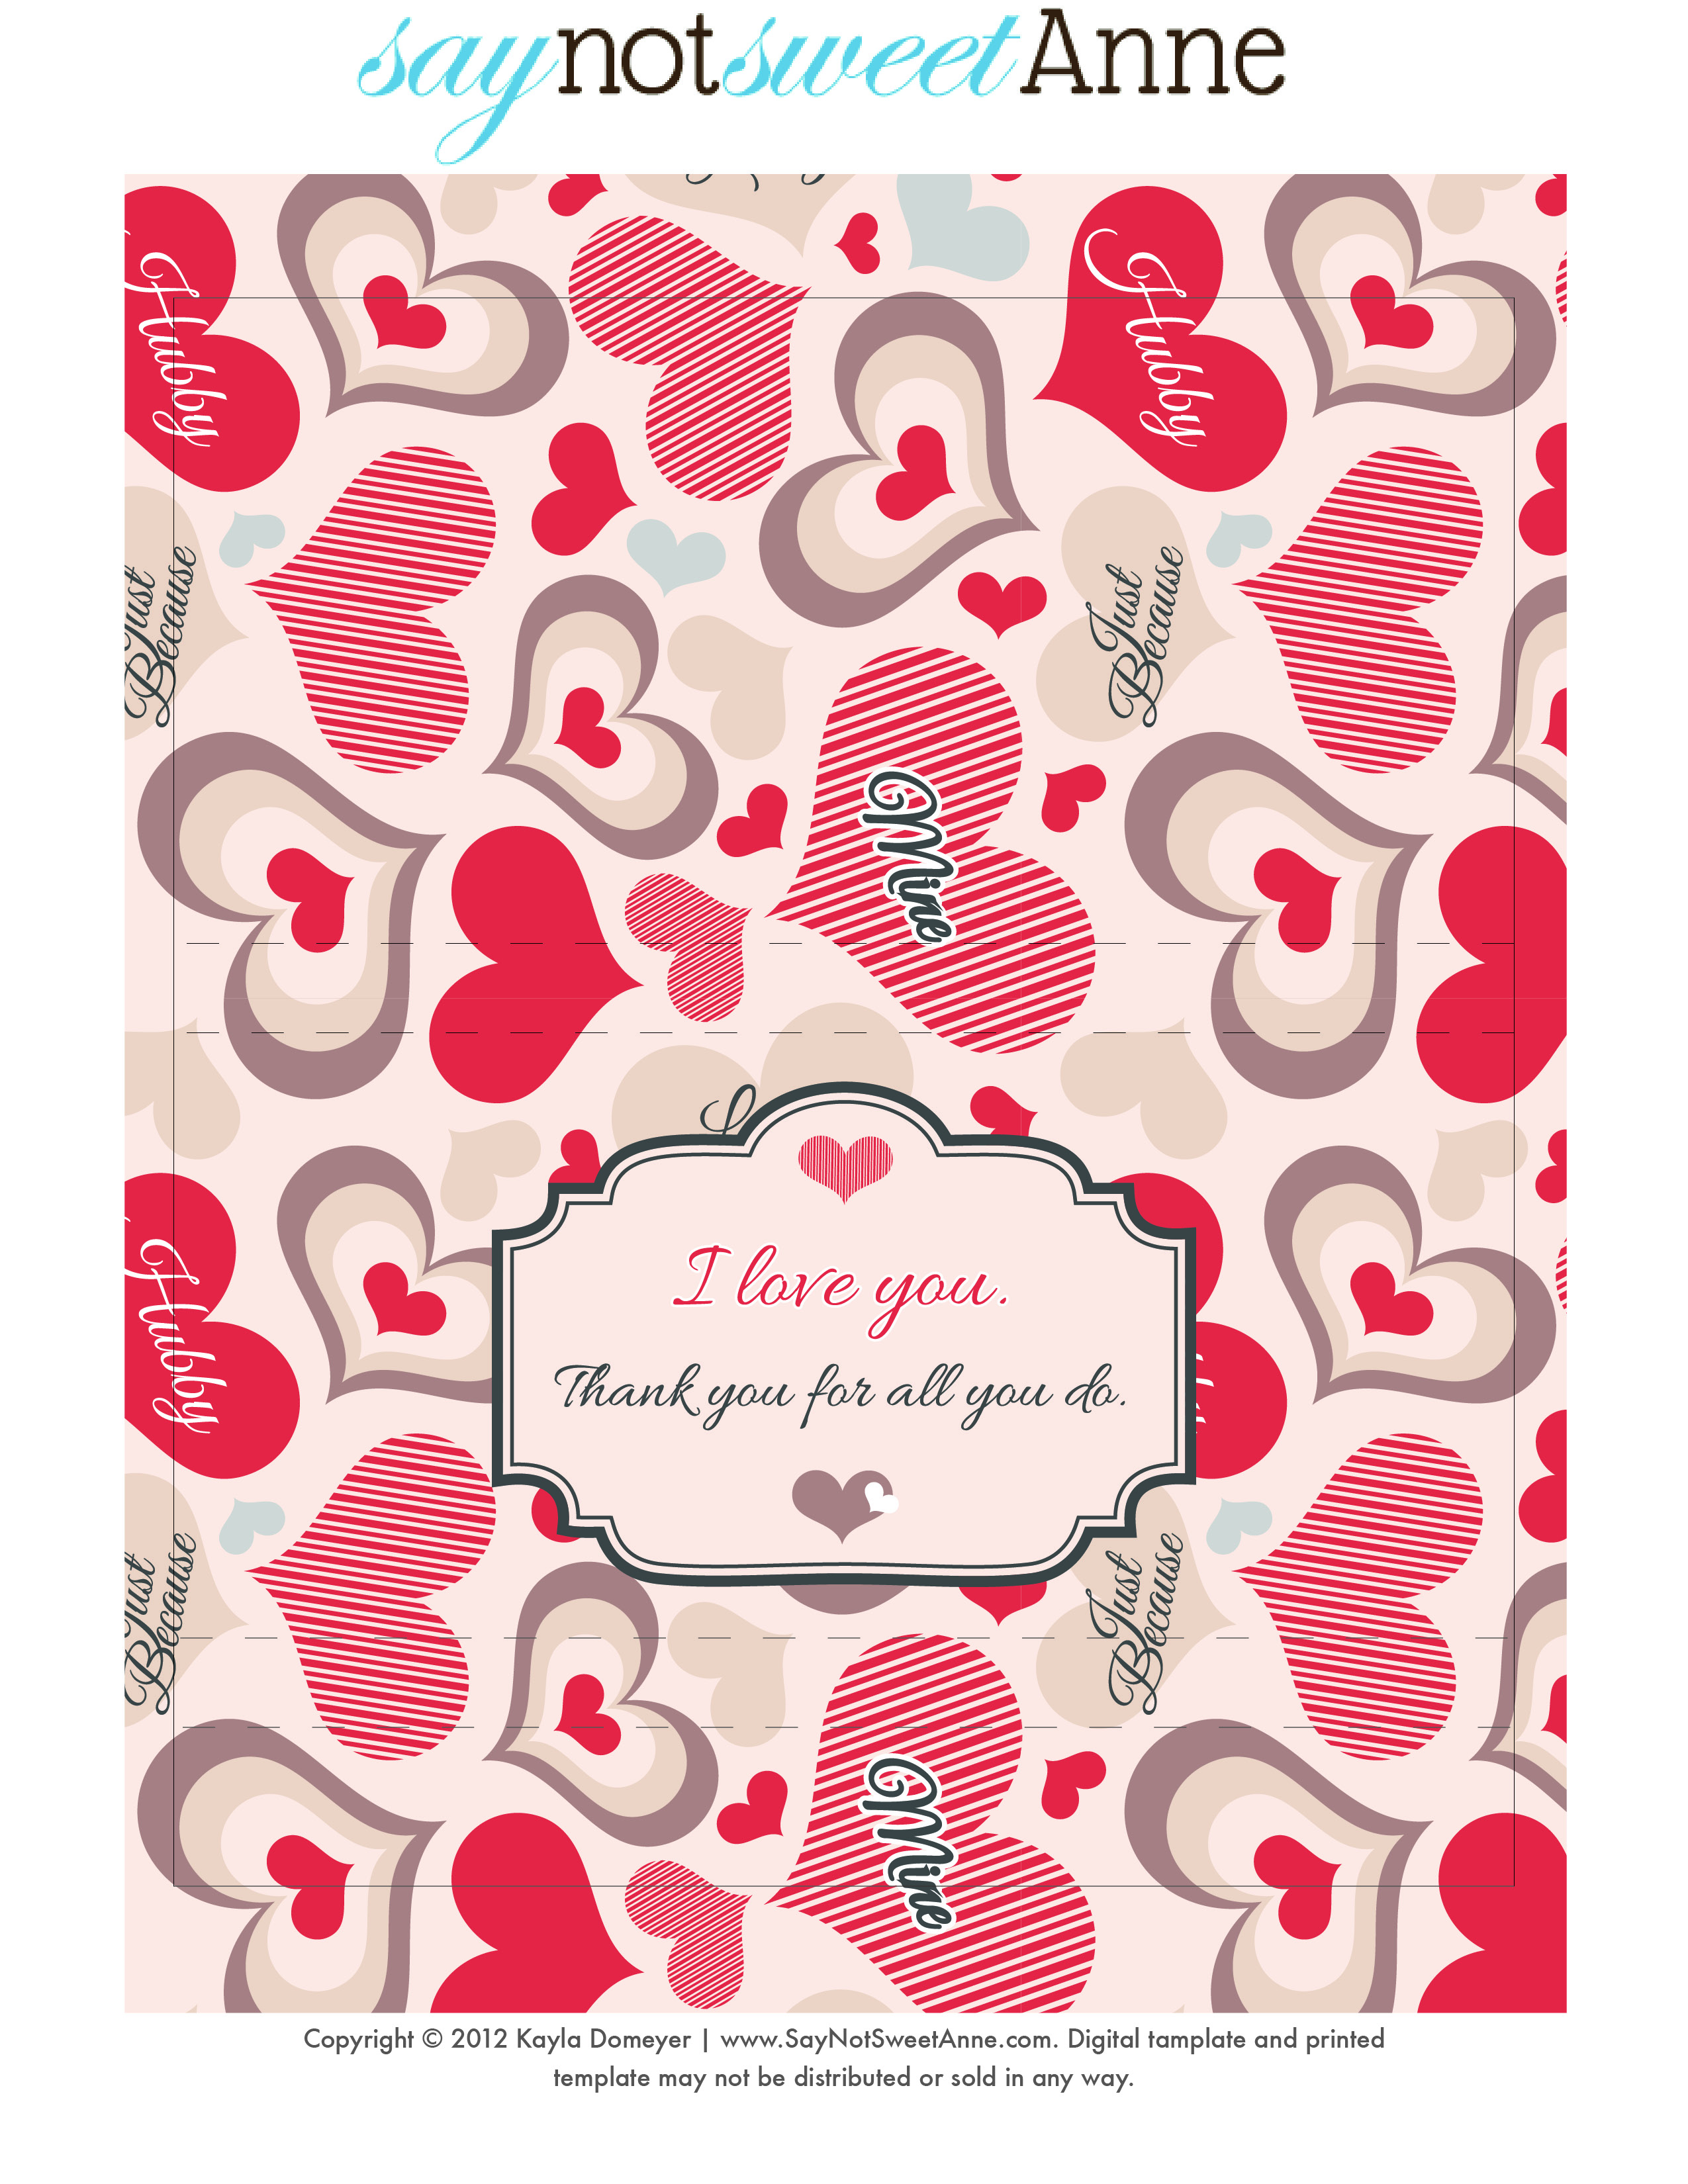 Just Because Candy Free Printable Sweet Anne Designs